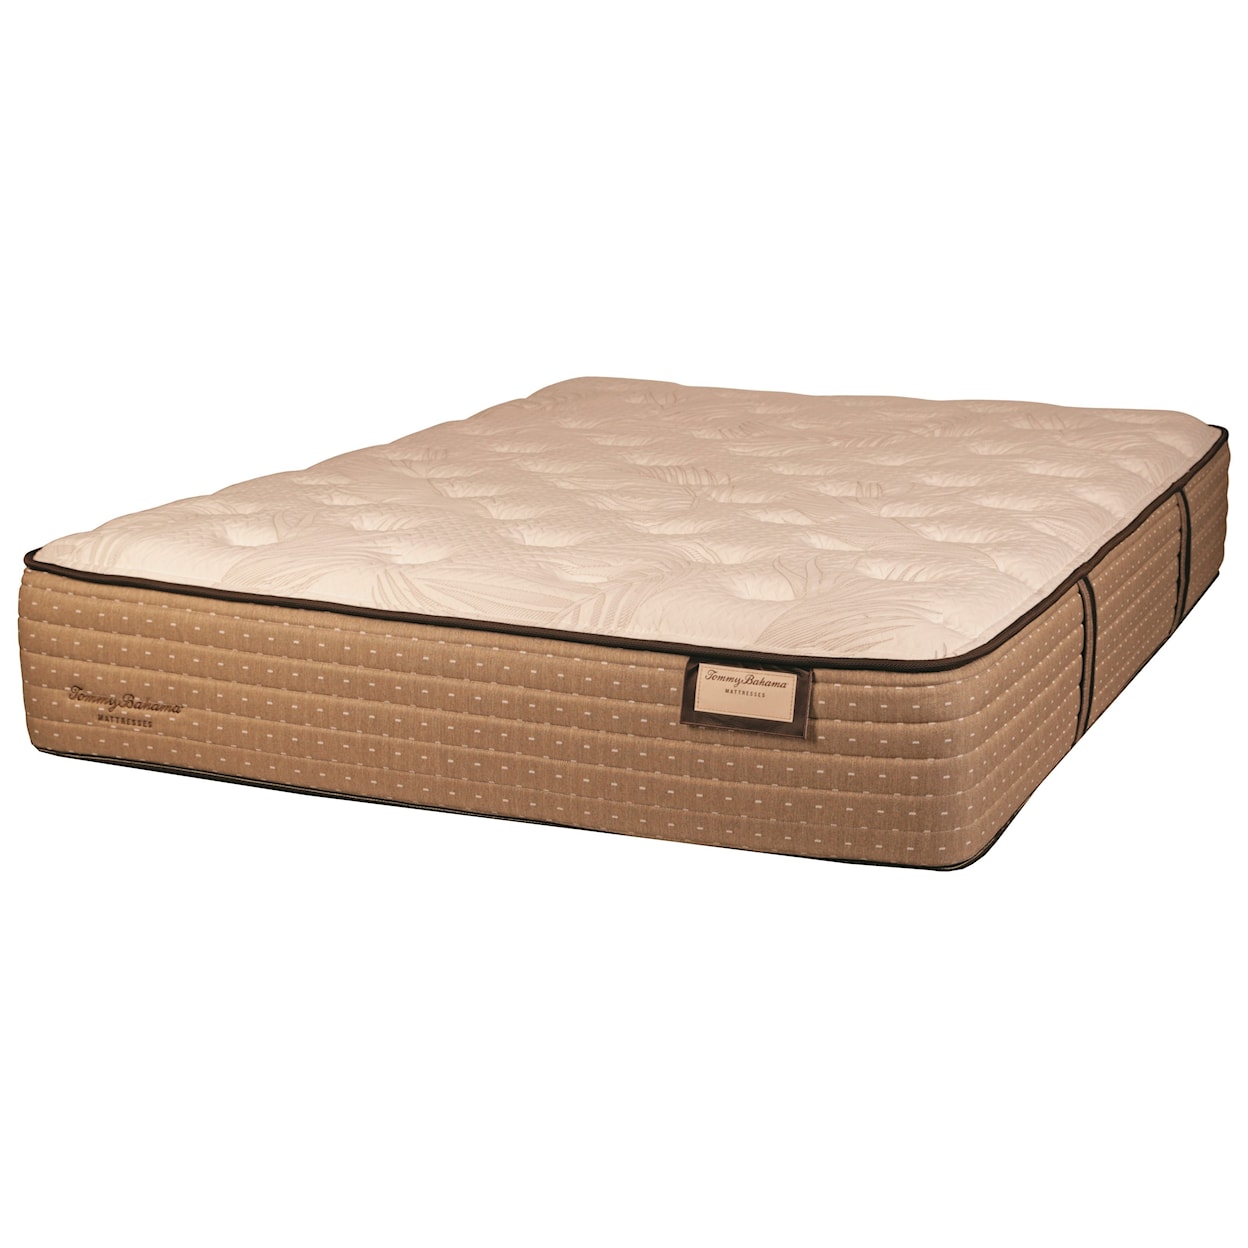 Therapedic Tommy Bahama Shake the Sand Firm 6034 Full Firm Luxury Mattress